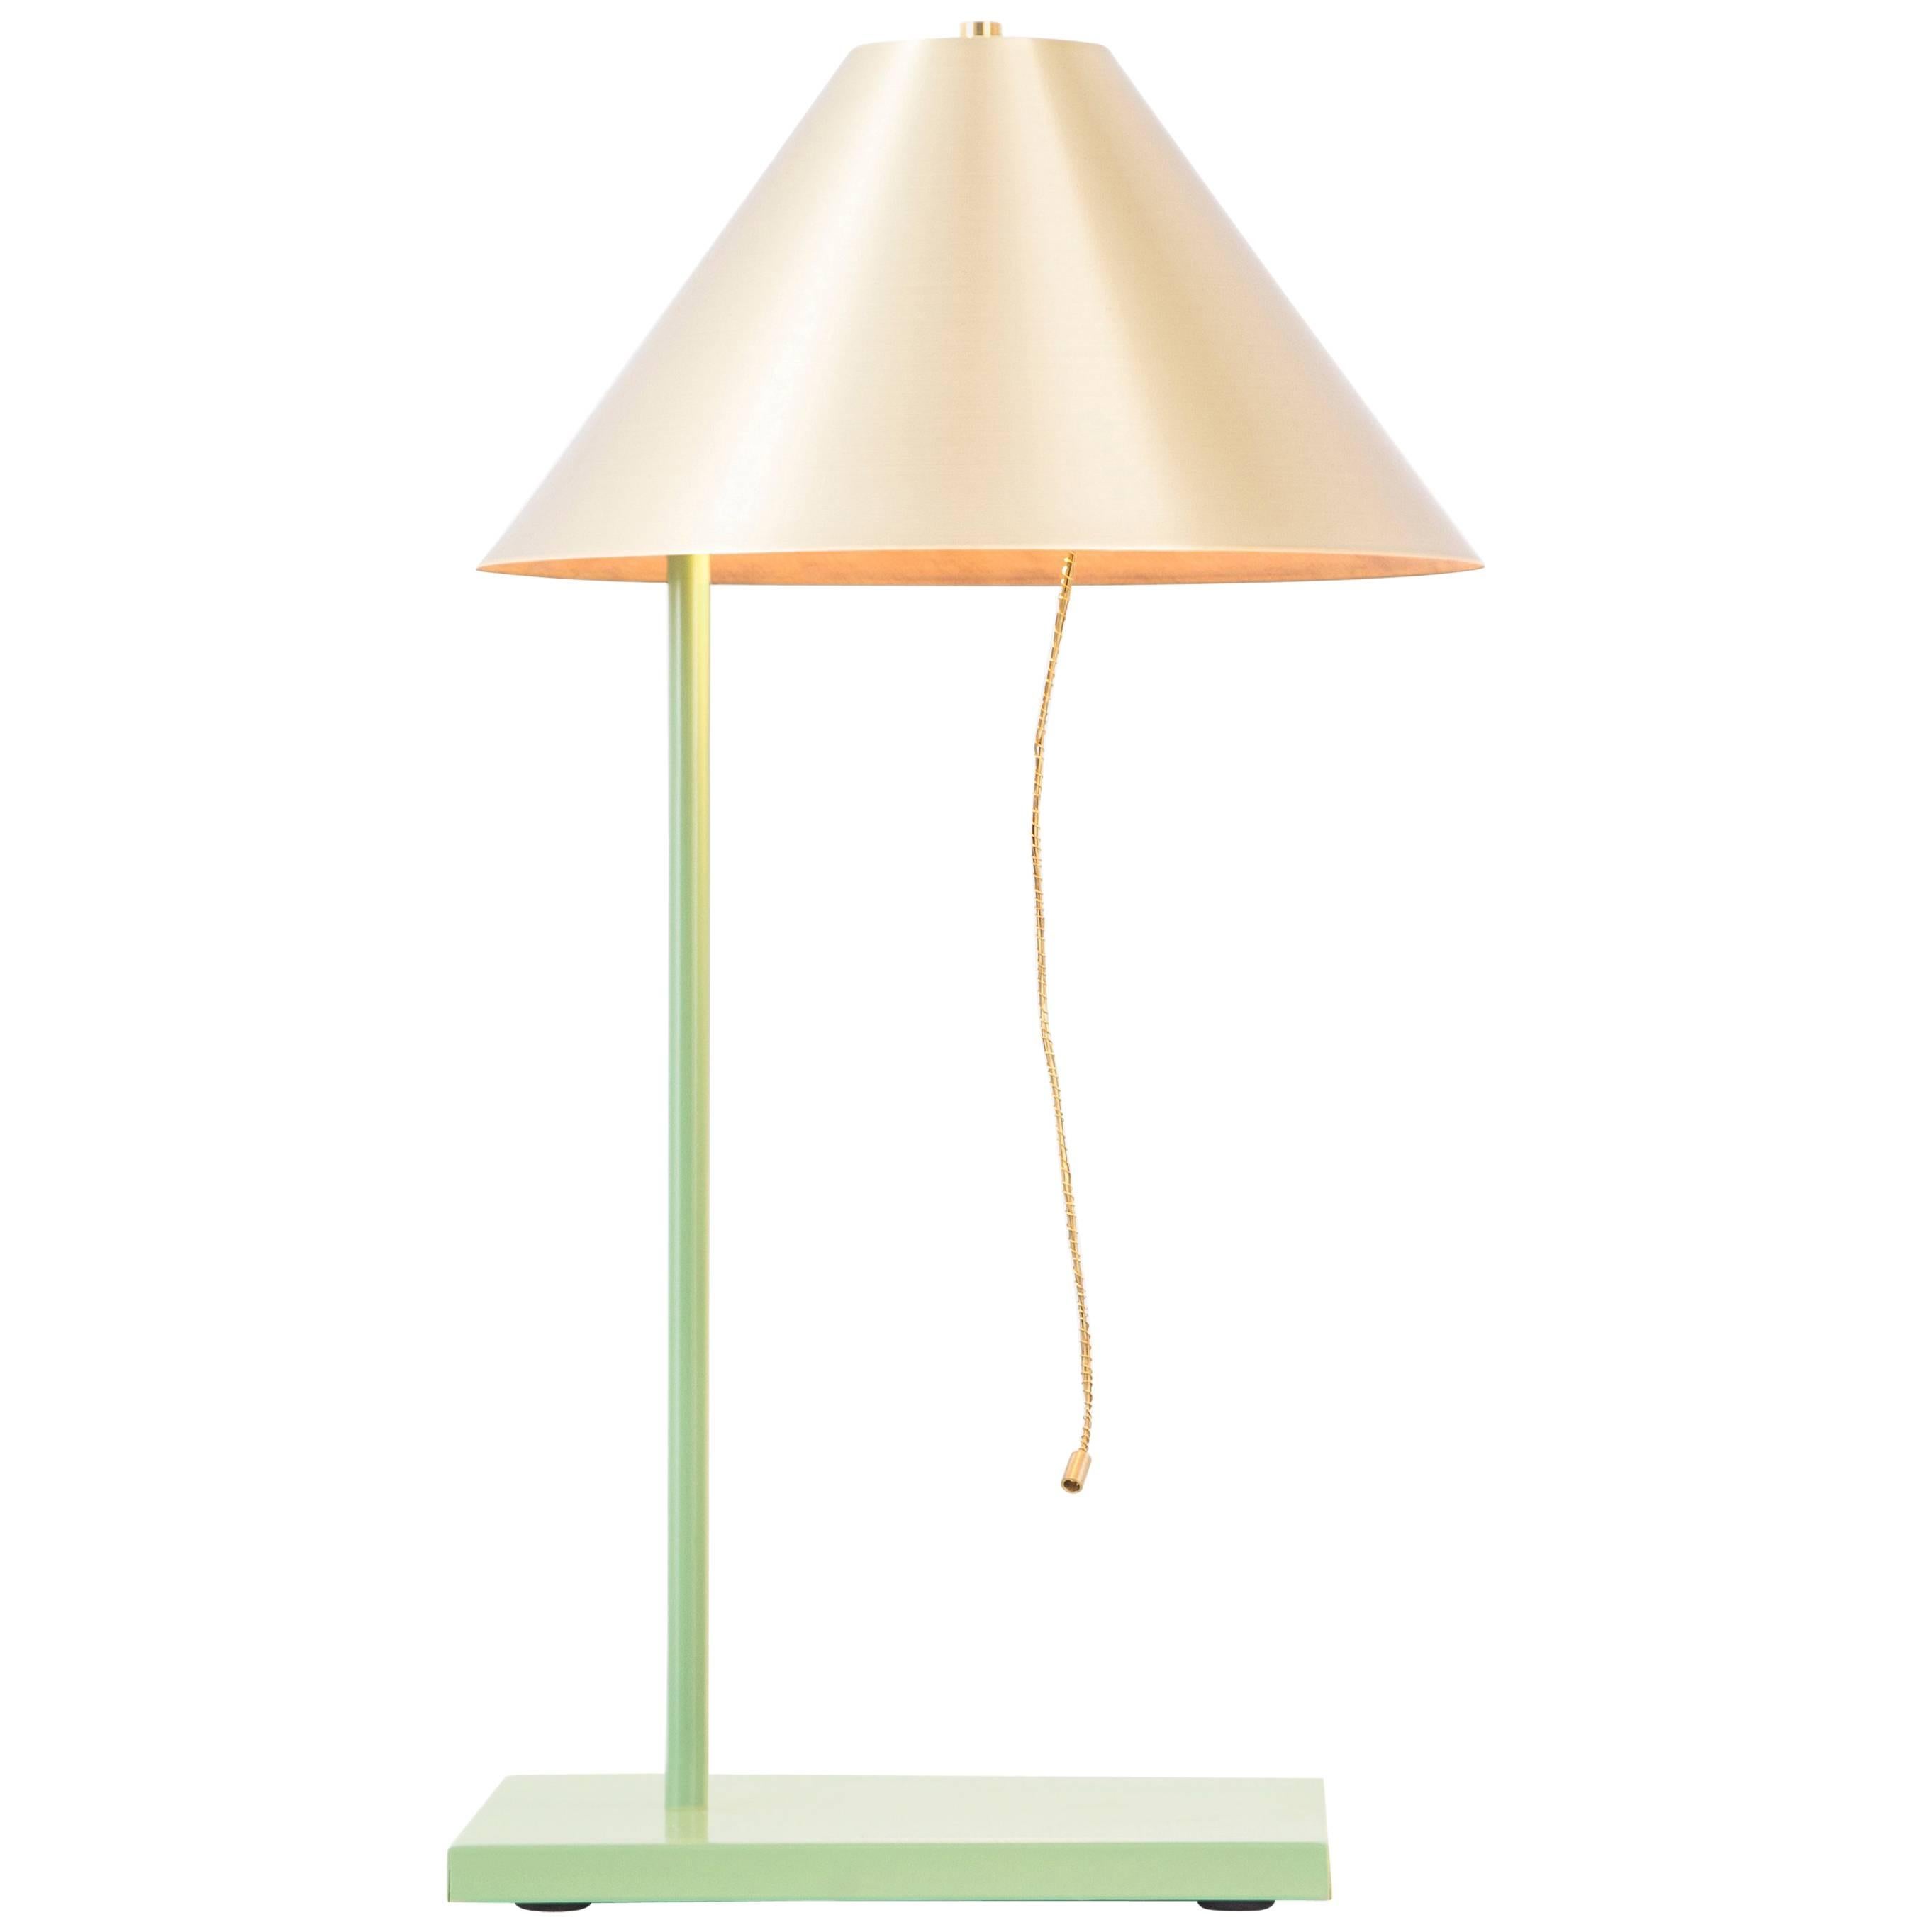 Contemporary Brazilian Table Lamp made of brass